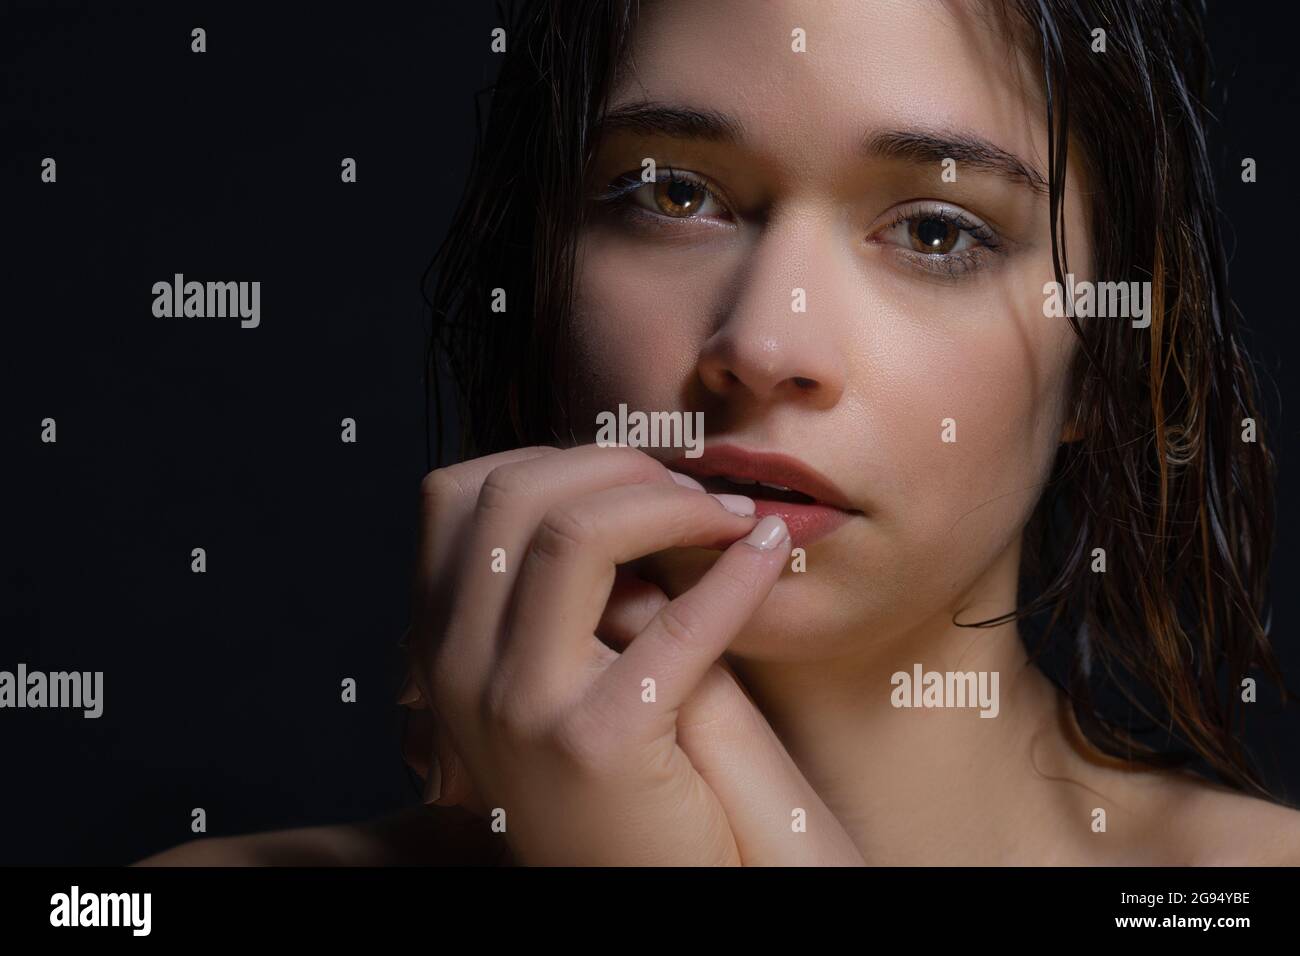 A sad young woman looks at the camera blankly. The woman is depressed due to loneliness and isolation. The Mental Effects of Isolating and Closing Your Home During Quarantine. Woman's face on black. Stock Photo